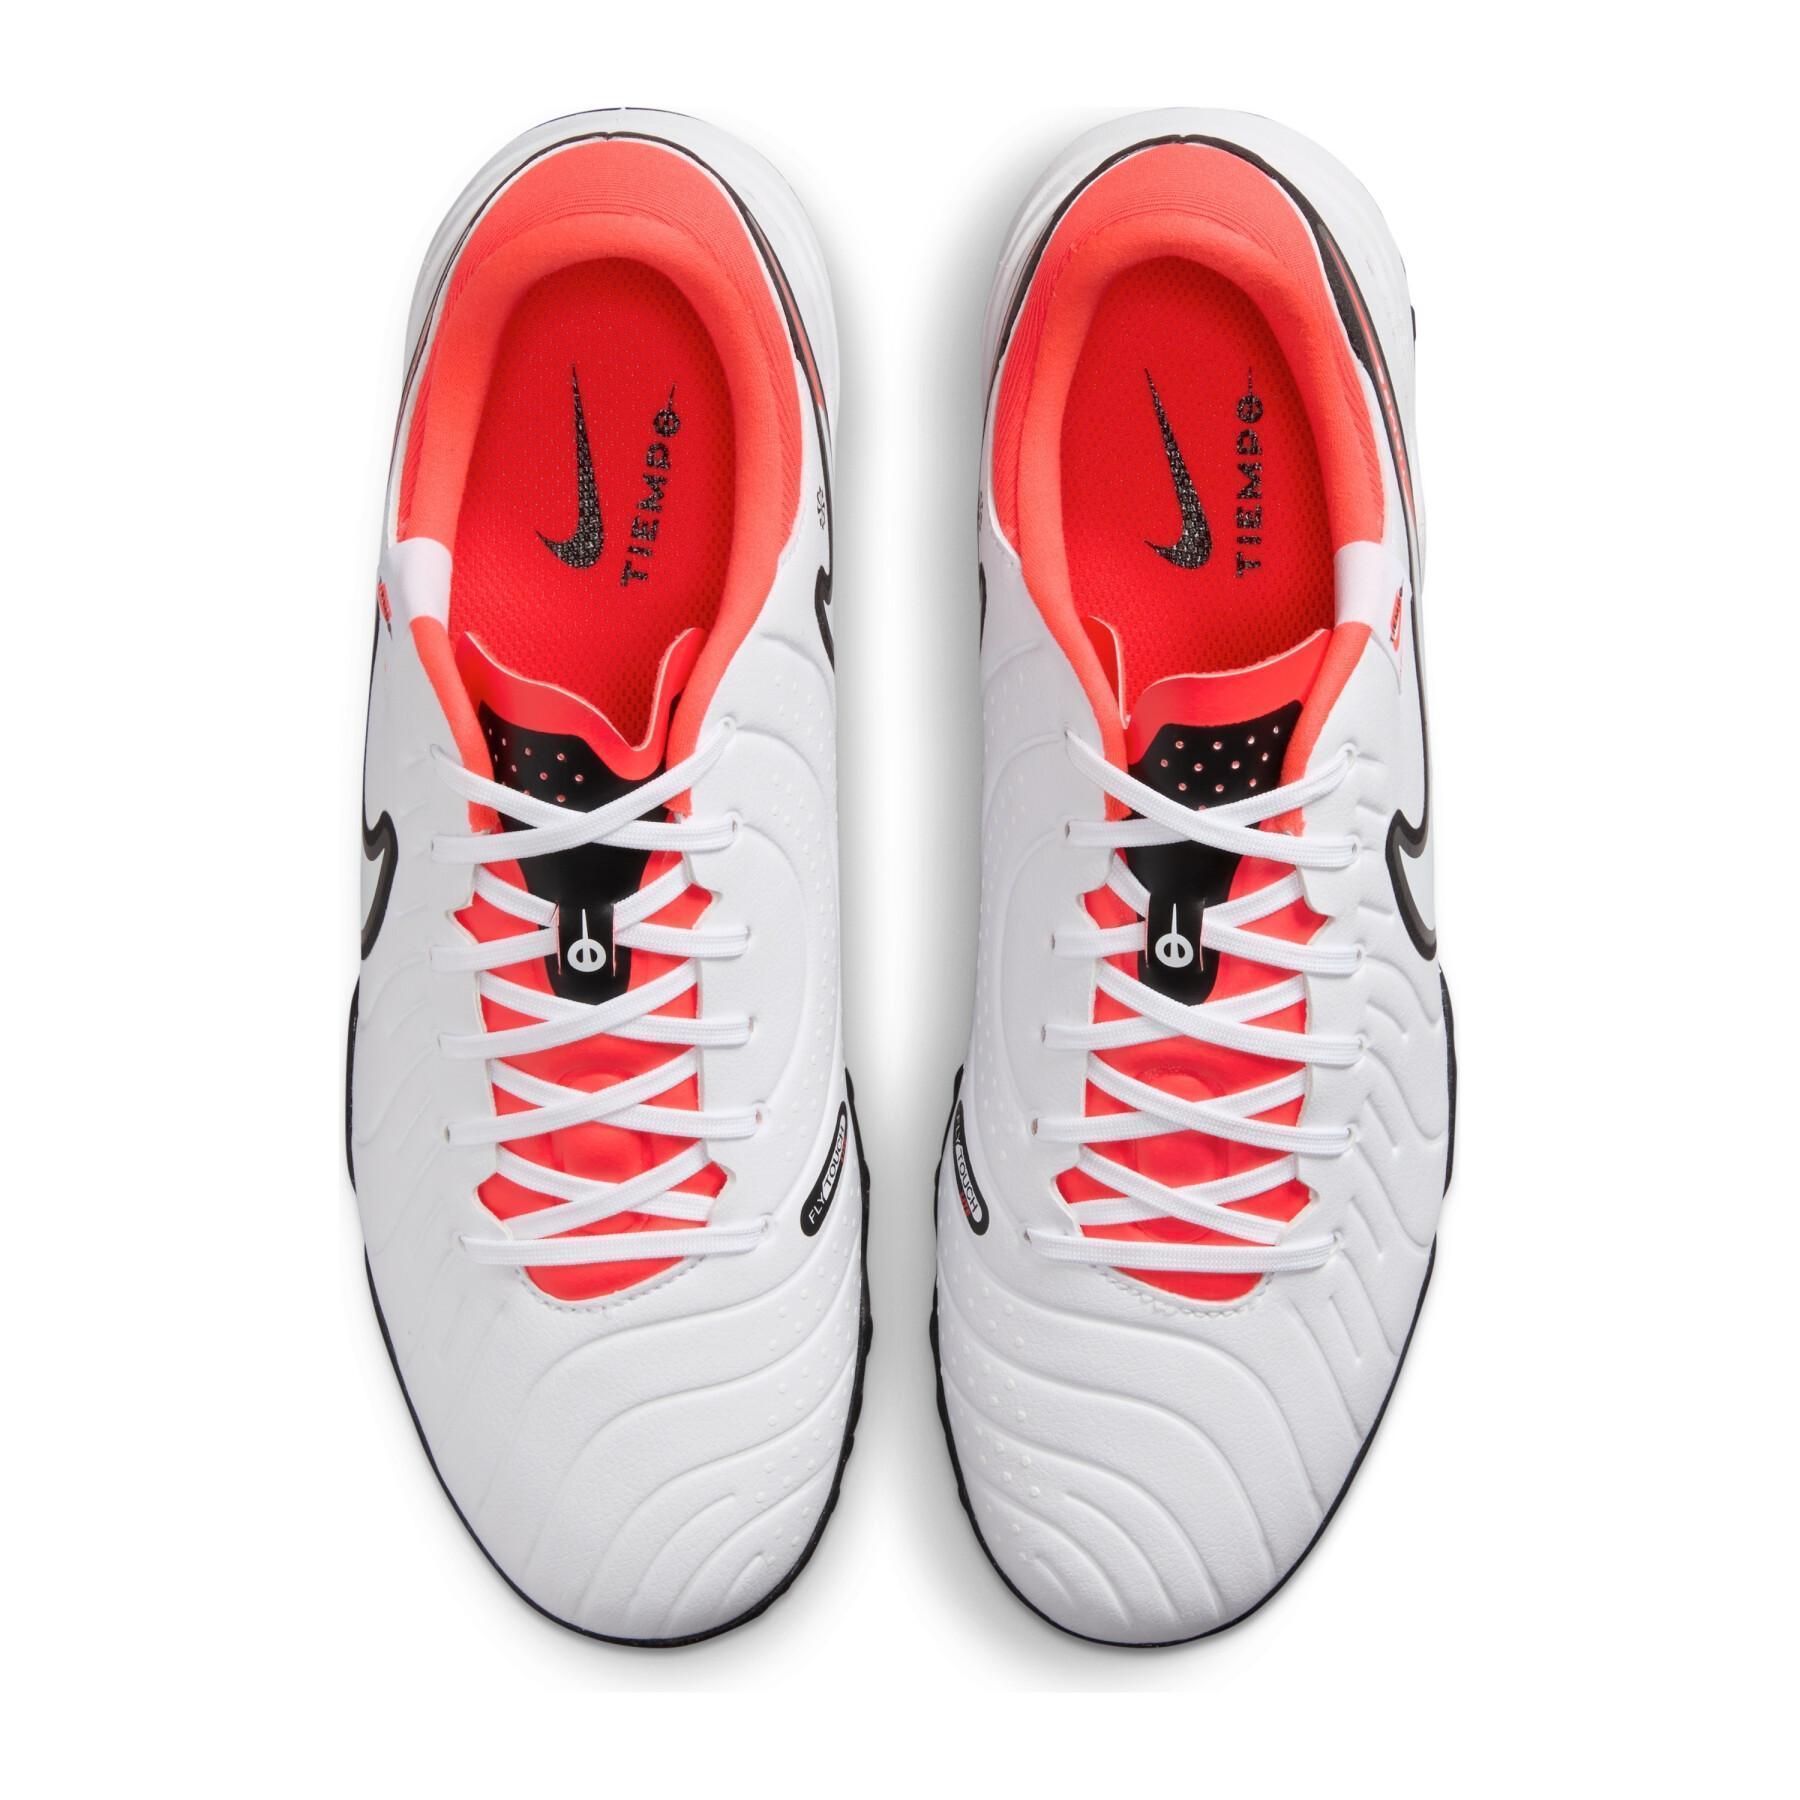 Chaussures de football Nike Tiempo Legend 10 Academy TF - Ready Pack